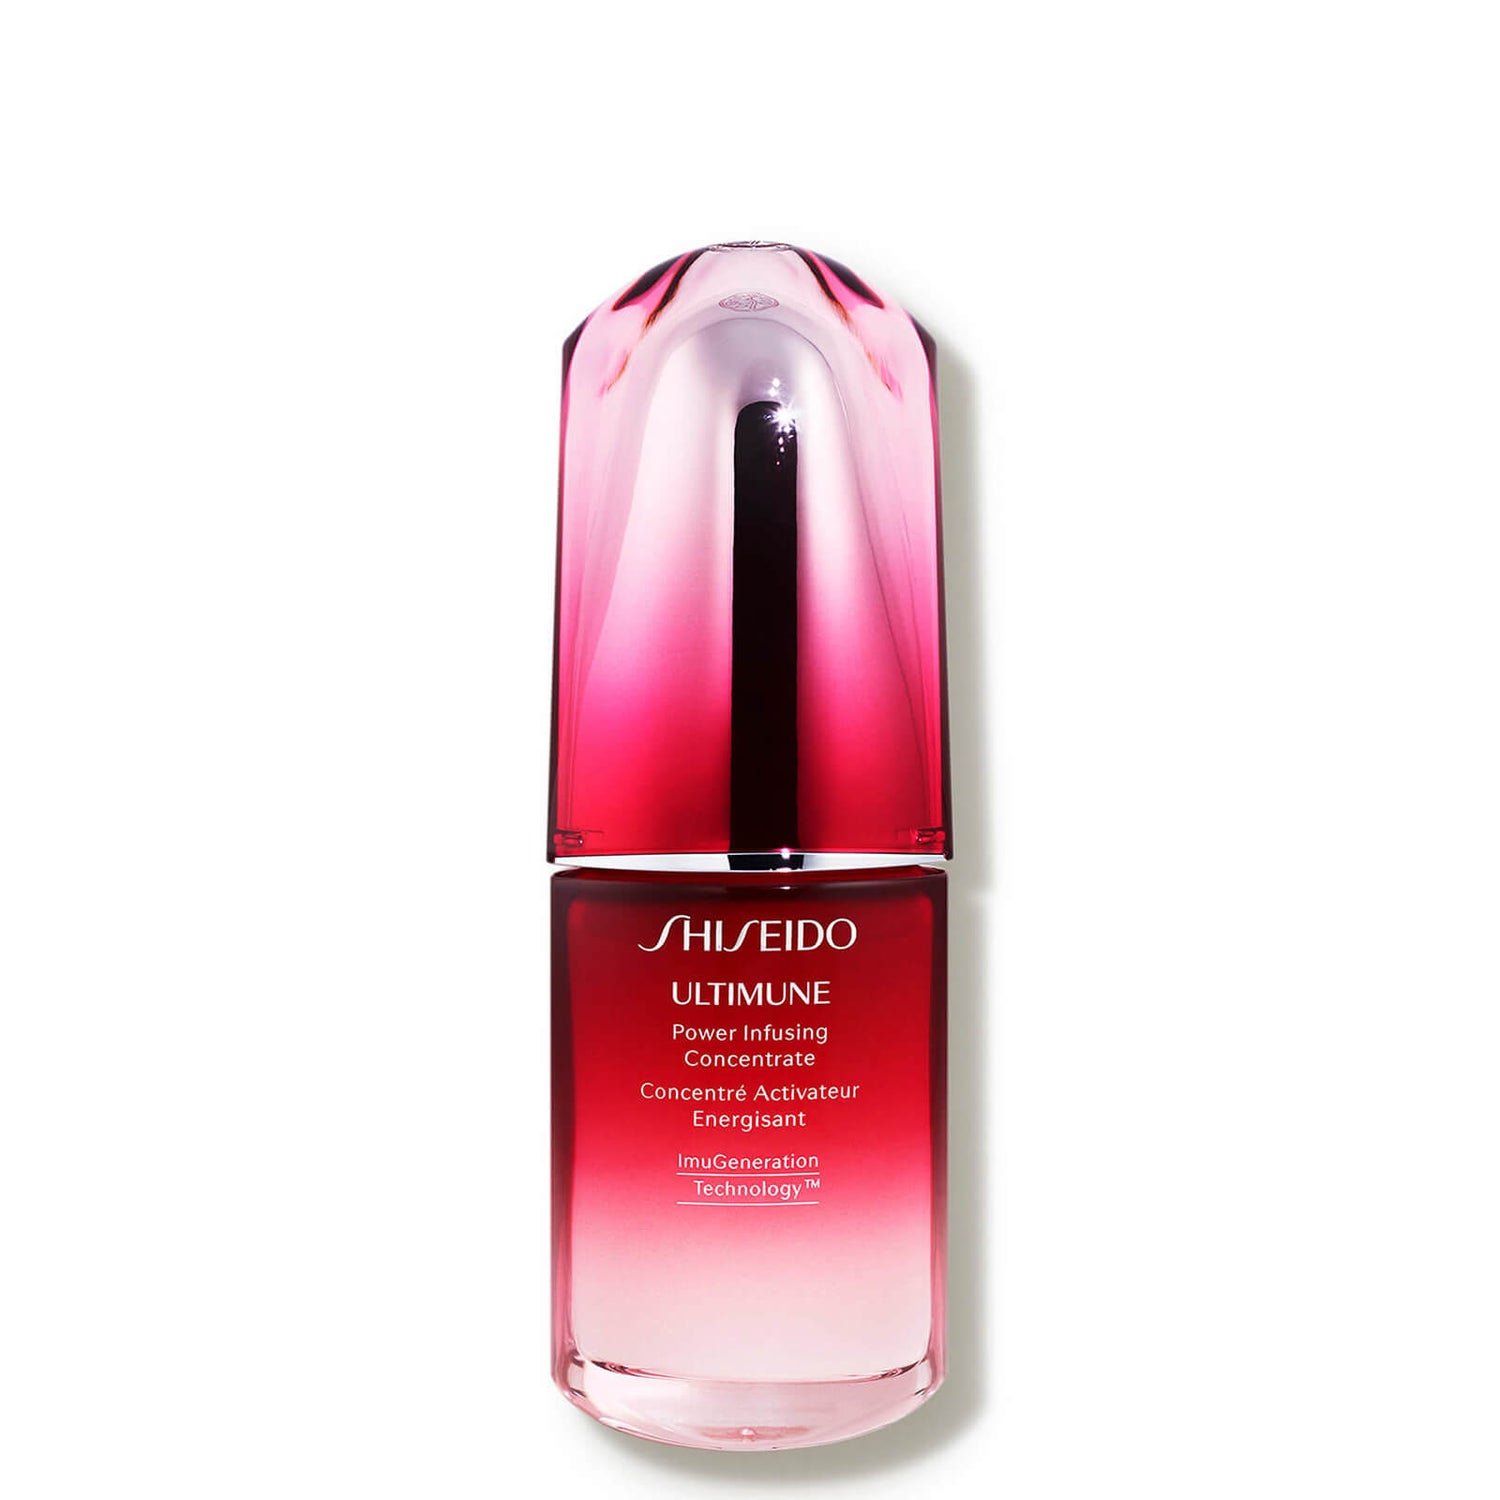 Shiseido Ultimune Power Infusing Concentrate (1 fl. oz.)